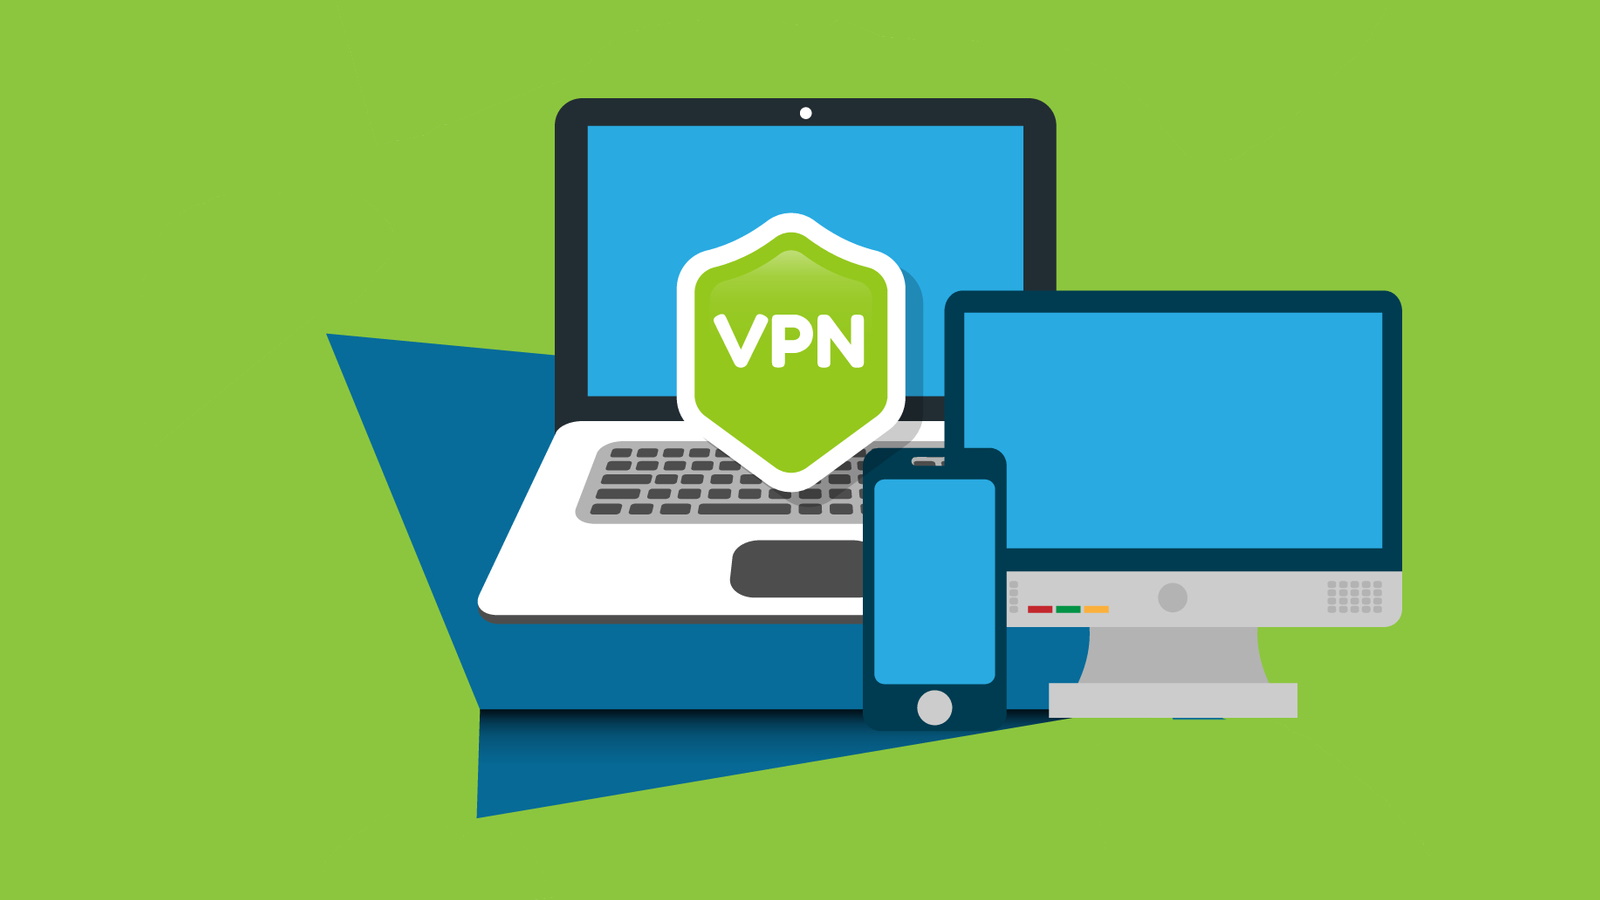 How Does a VPN Work?